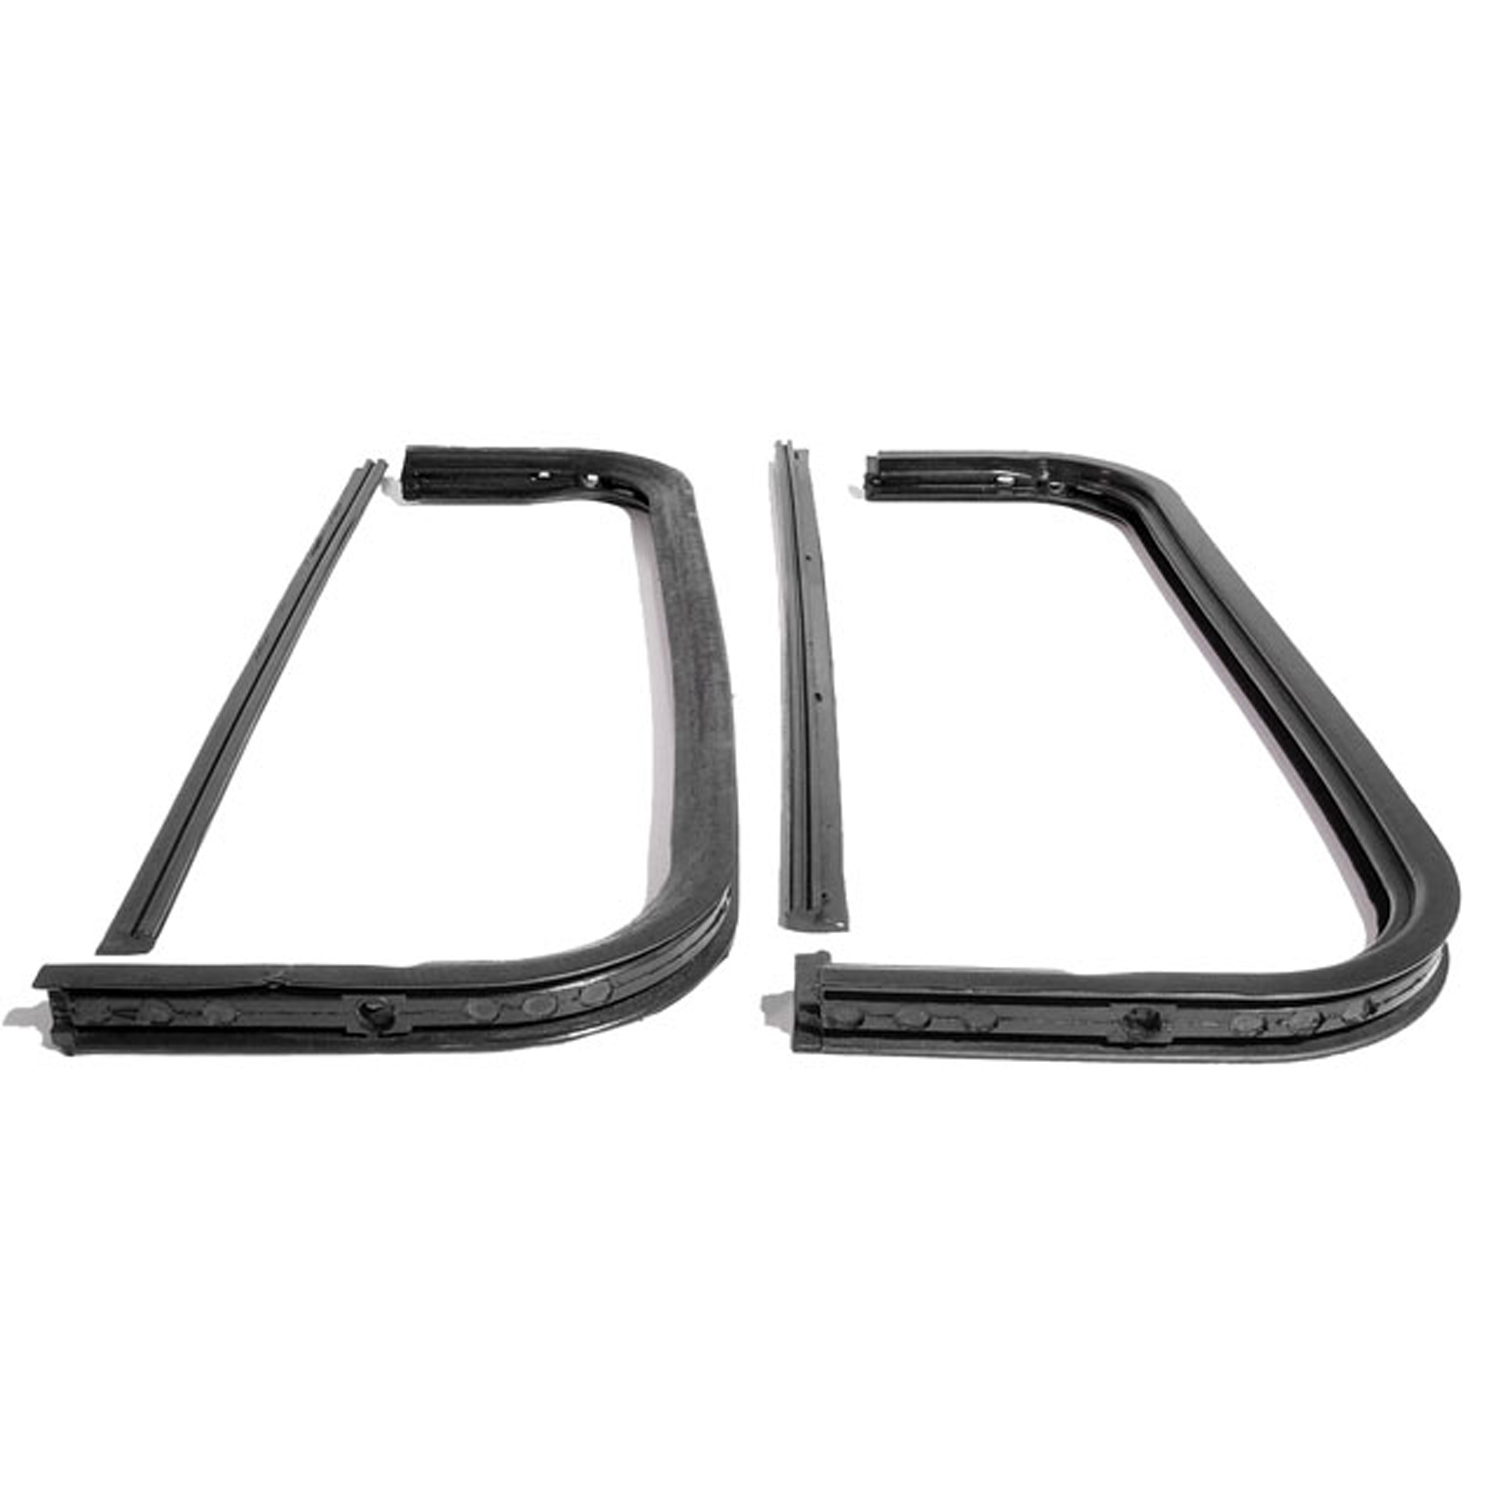 1962 Chevrolet C20 Pickup Vent Window Seals with Division Post Seals-WR 1900